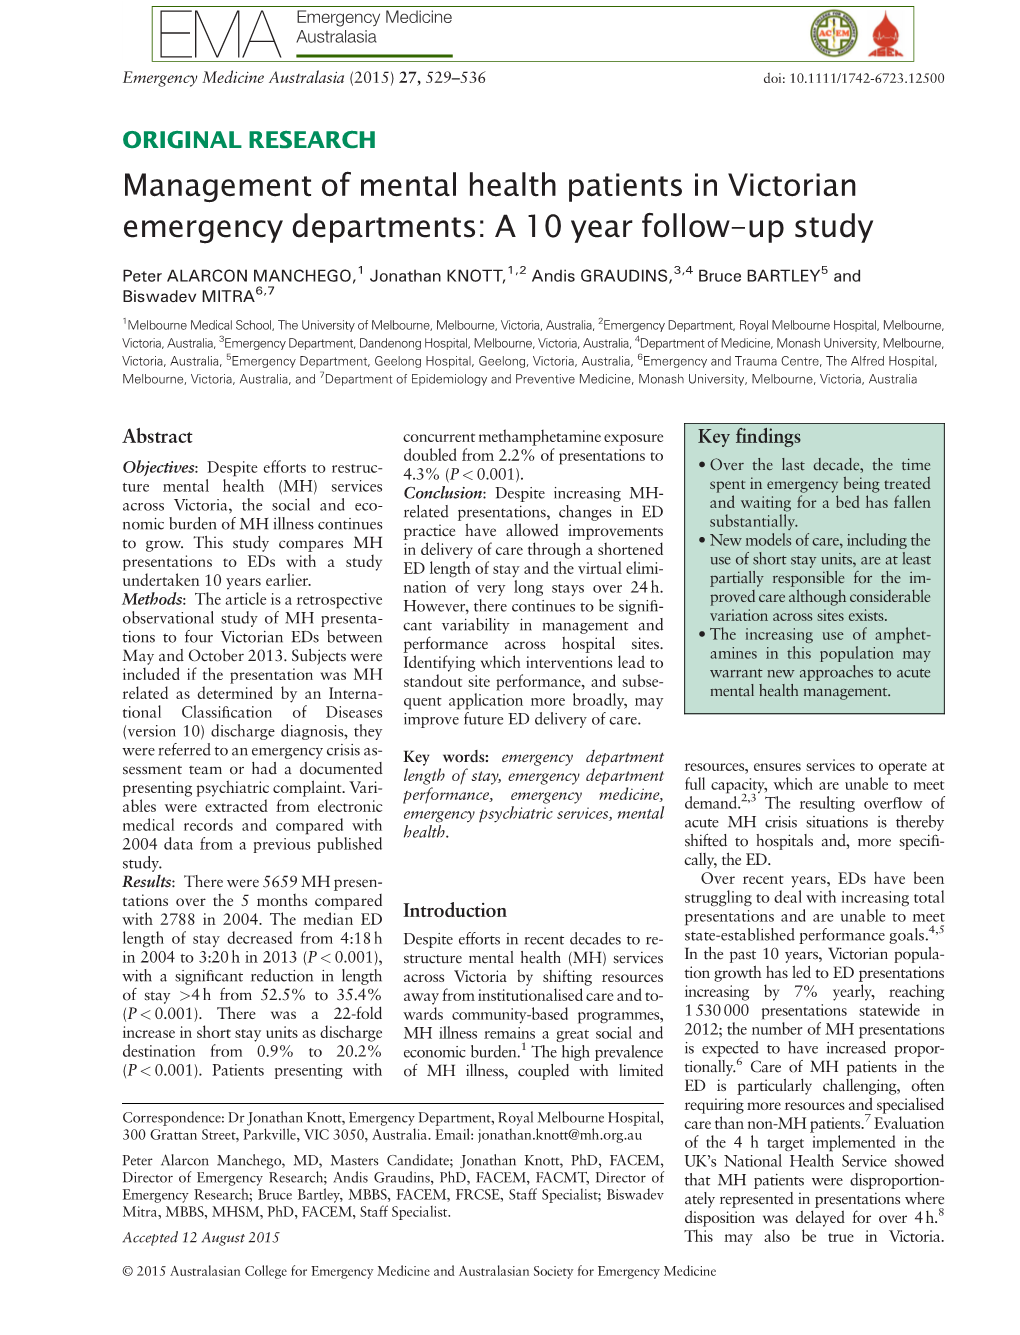 Management of Mental Health Patients in Victorian Emergency Departments: a 10 Year Follow-Up Study